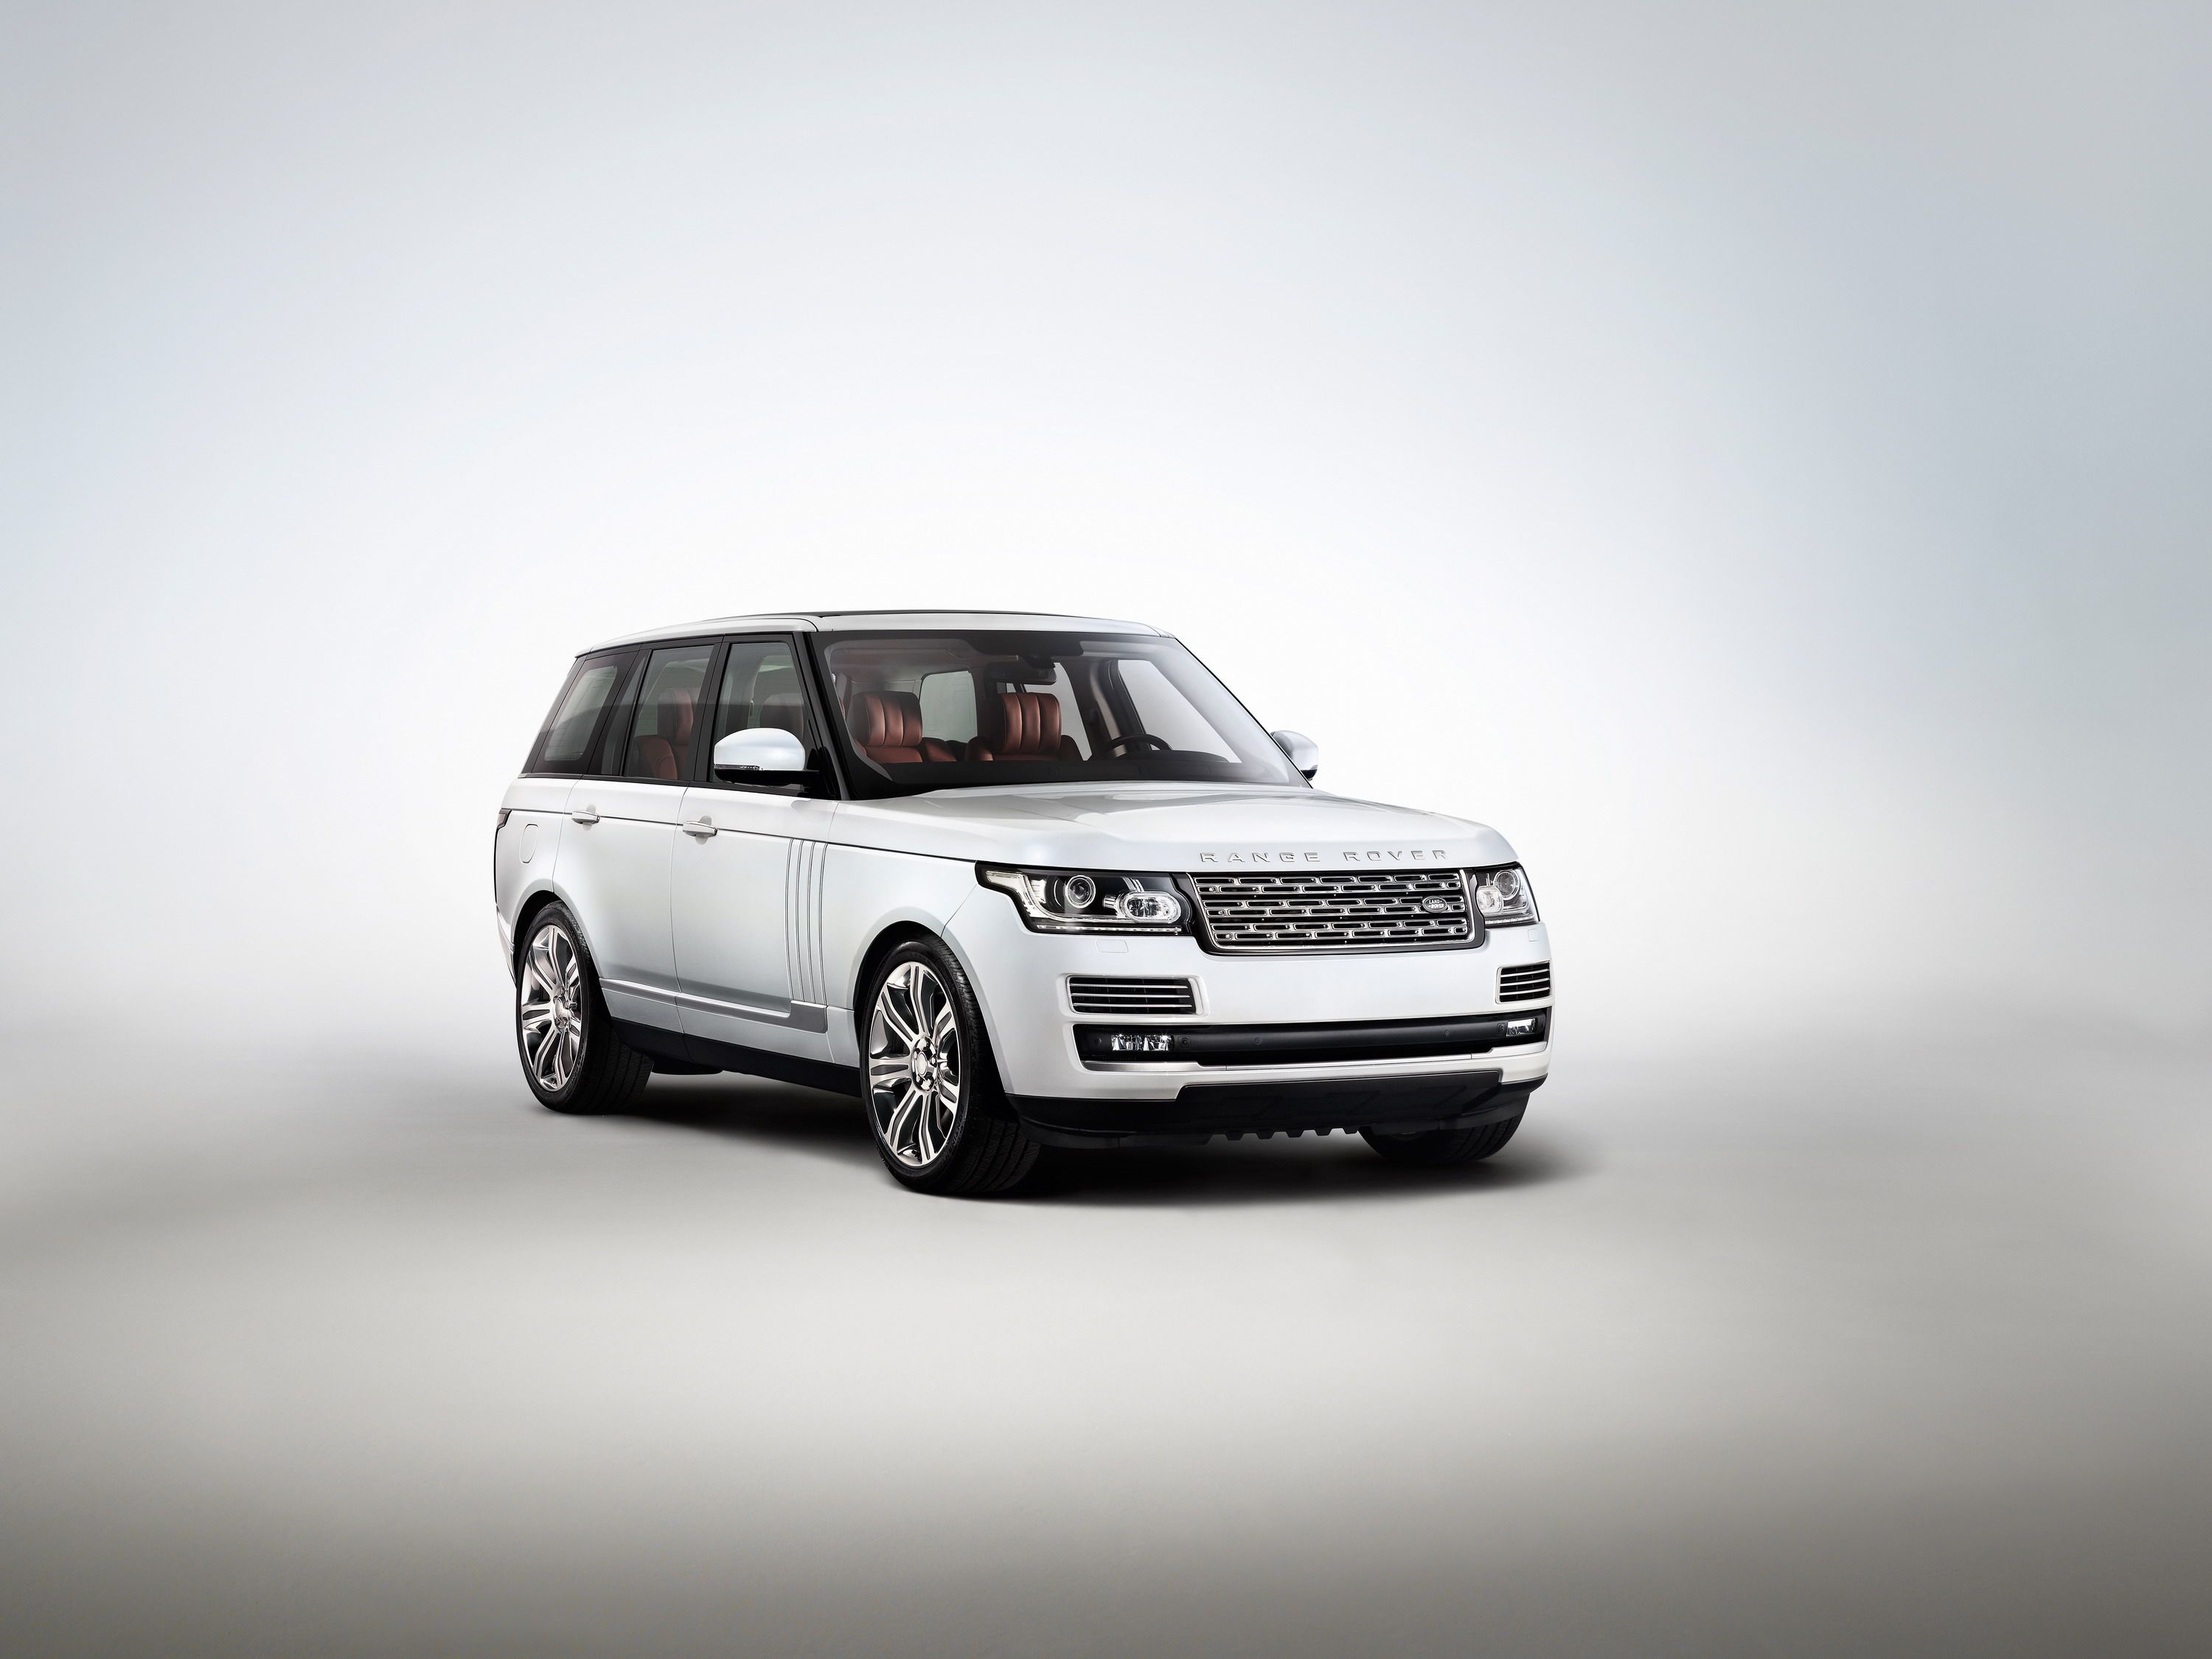 Land Rover Range Rover Autobiography Black Picture, Photo, Wallpaper